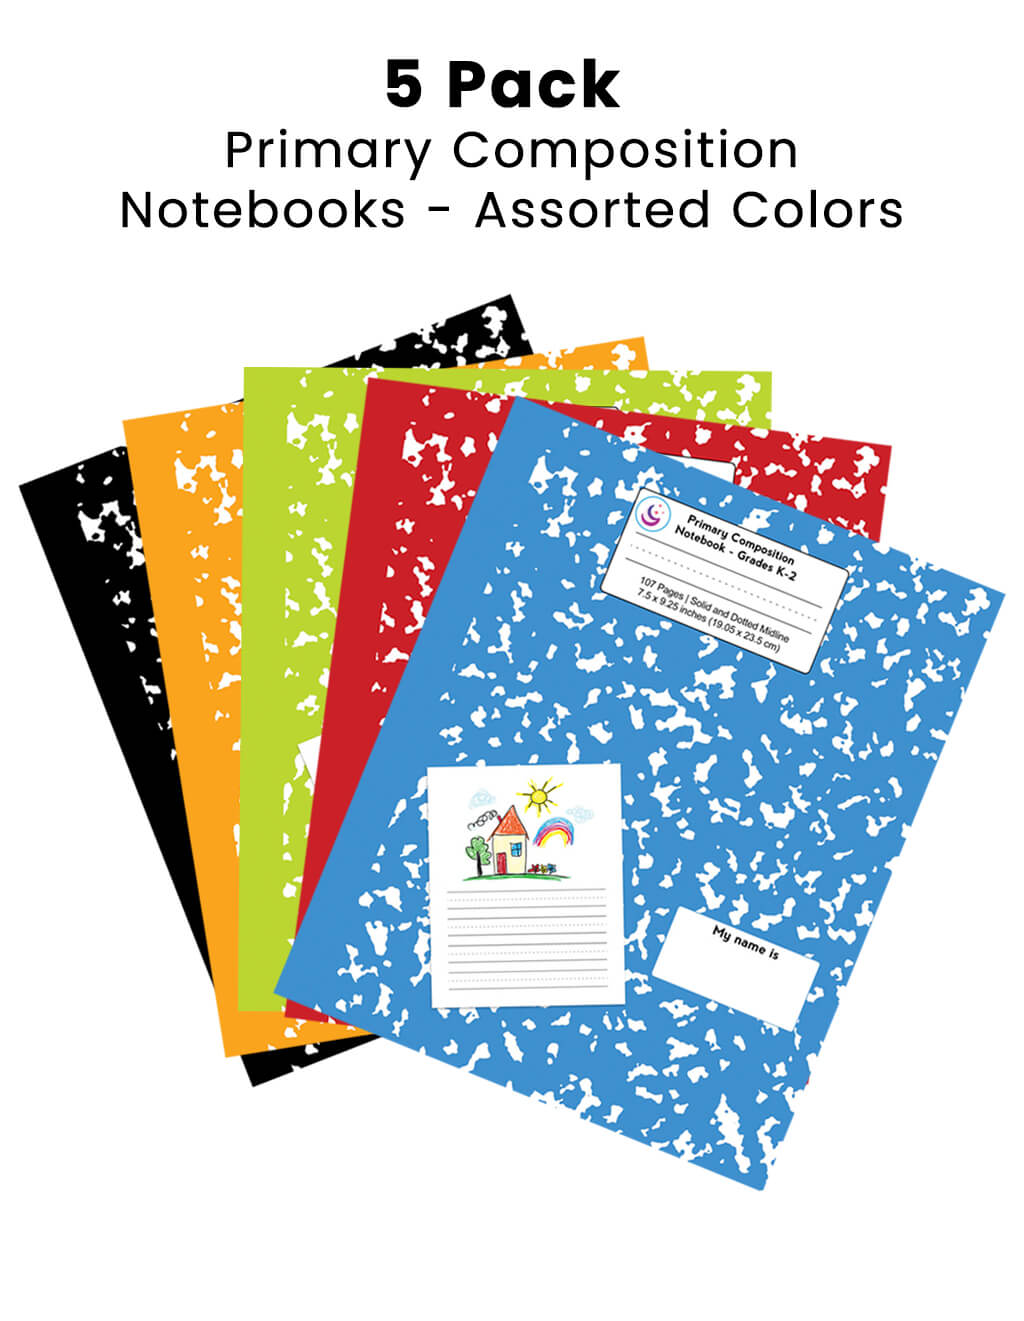 5 Pack of Primary Composition Notebooks: Assorted Colors